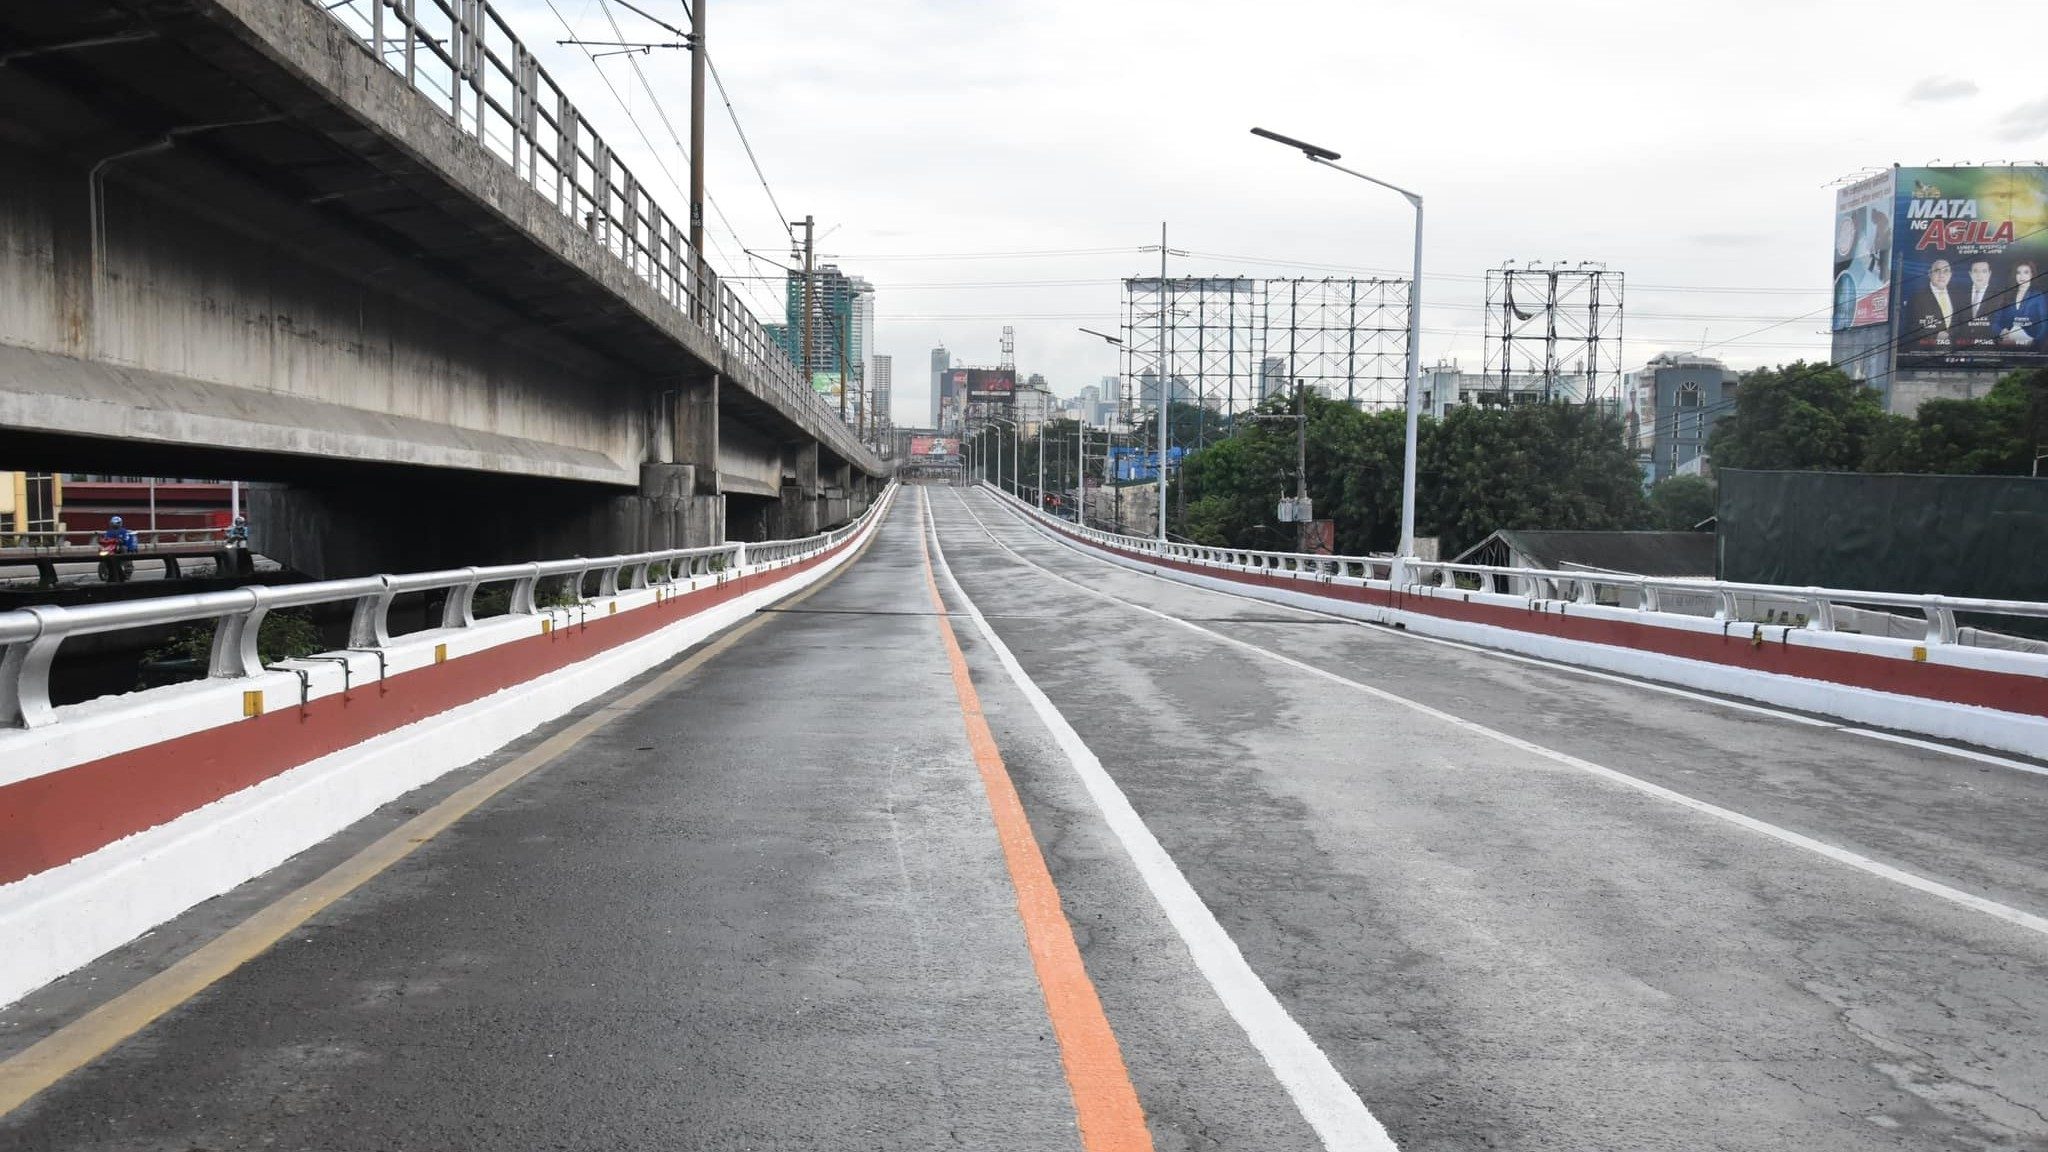 EDSA-Kamuning flyover to partially close for 11 months starting April 25